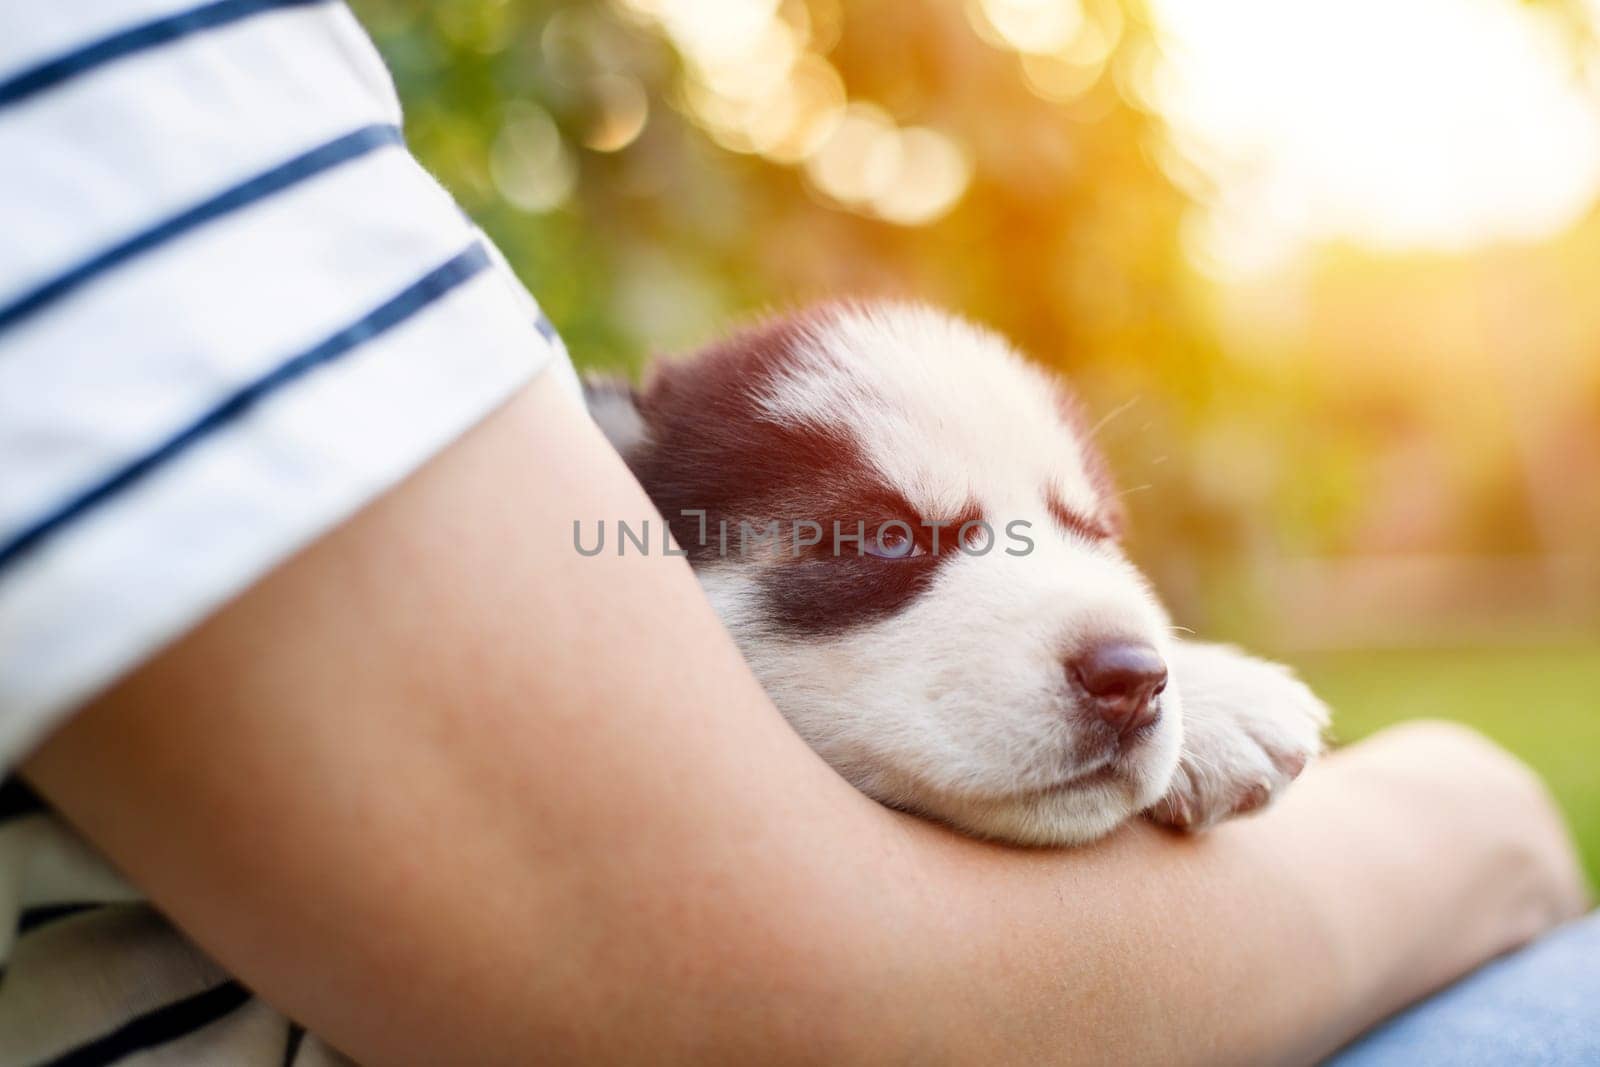 Cute sleepy puppy nestled in child's arms outdoors with blurry background. Soft focus on animal friendship and care in a warm setting.